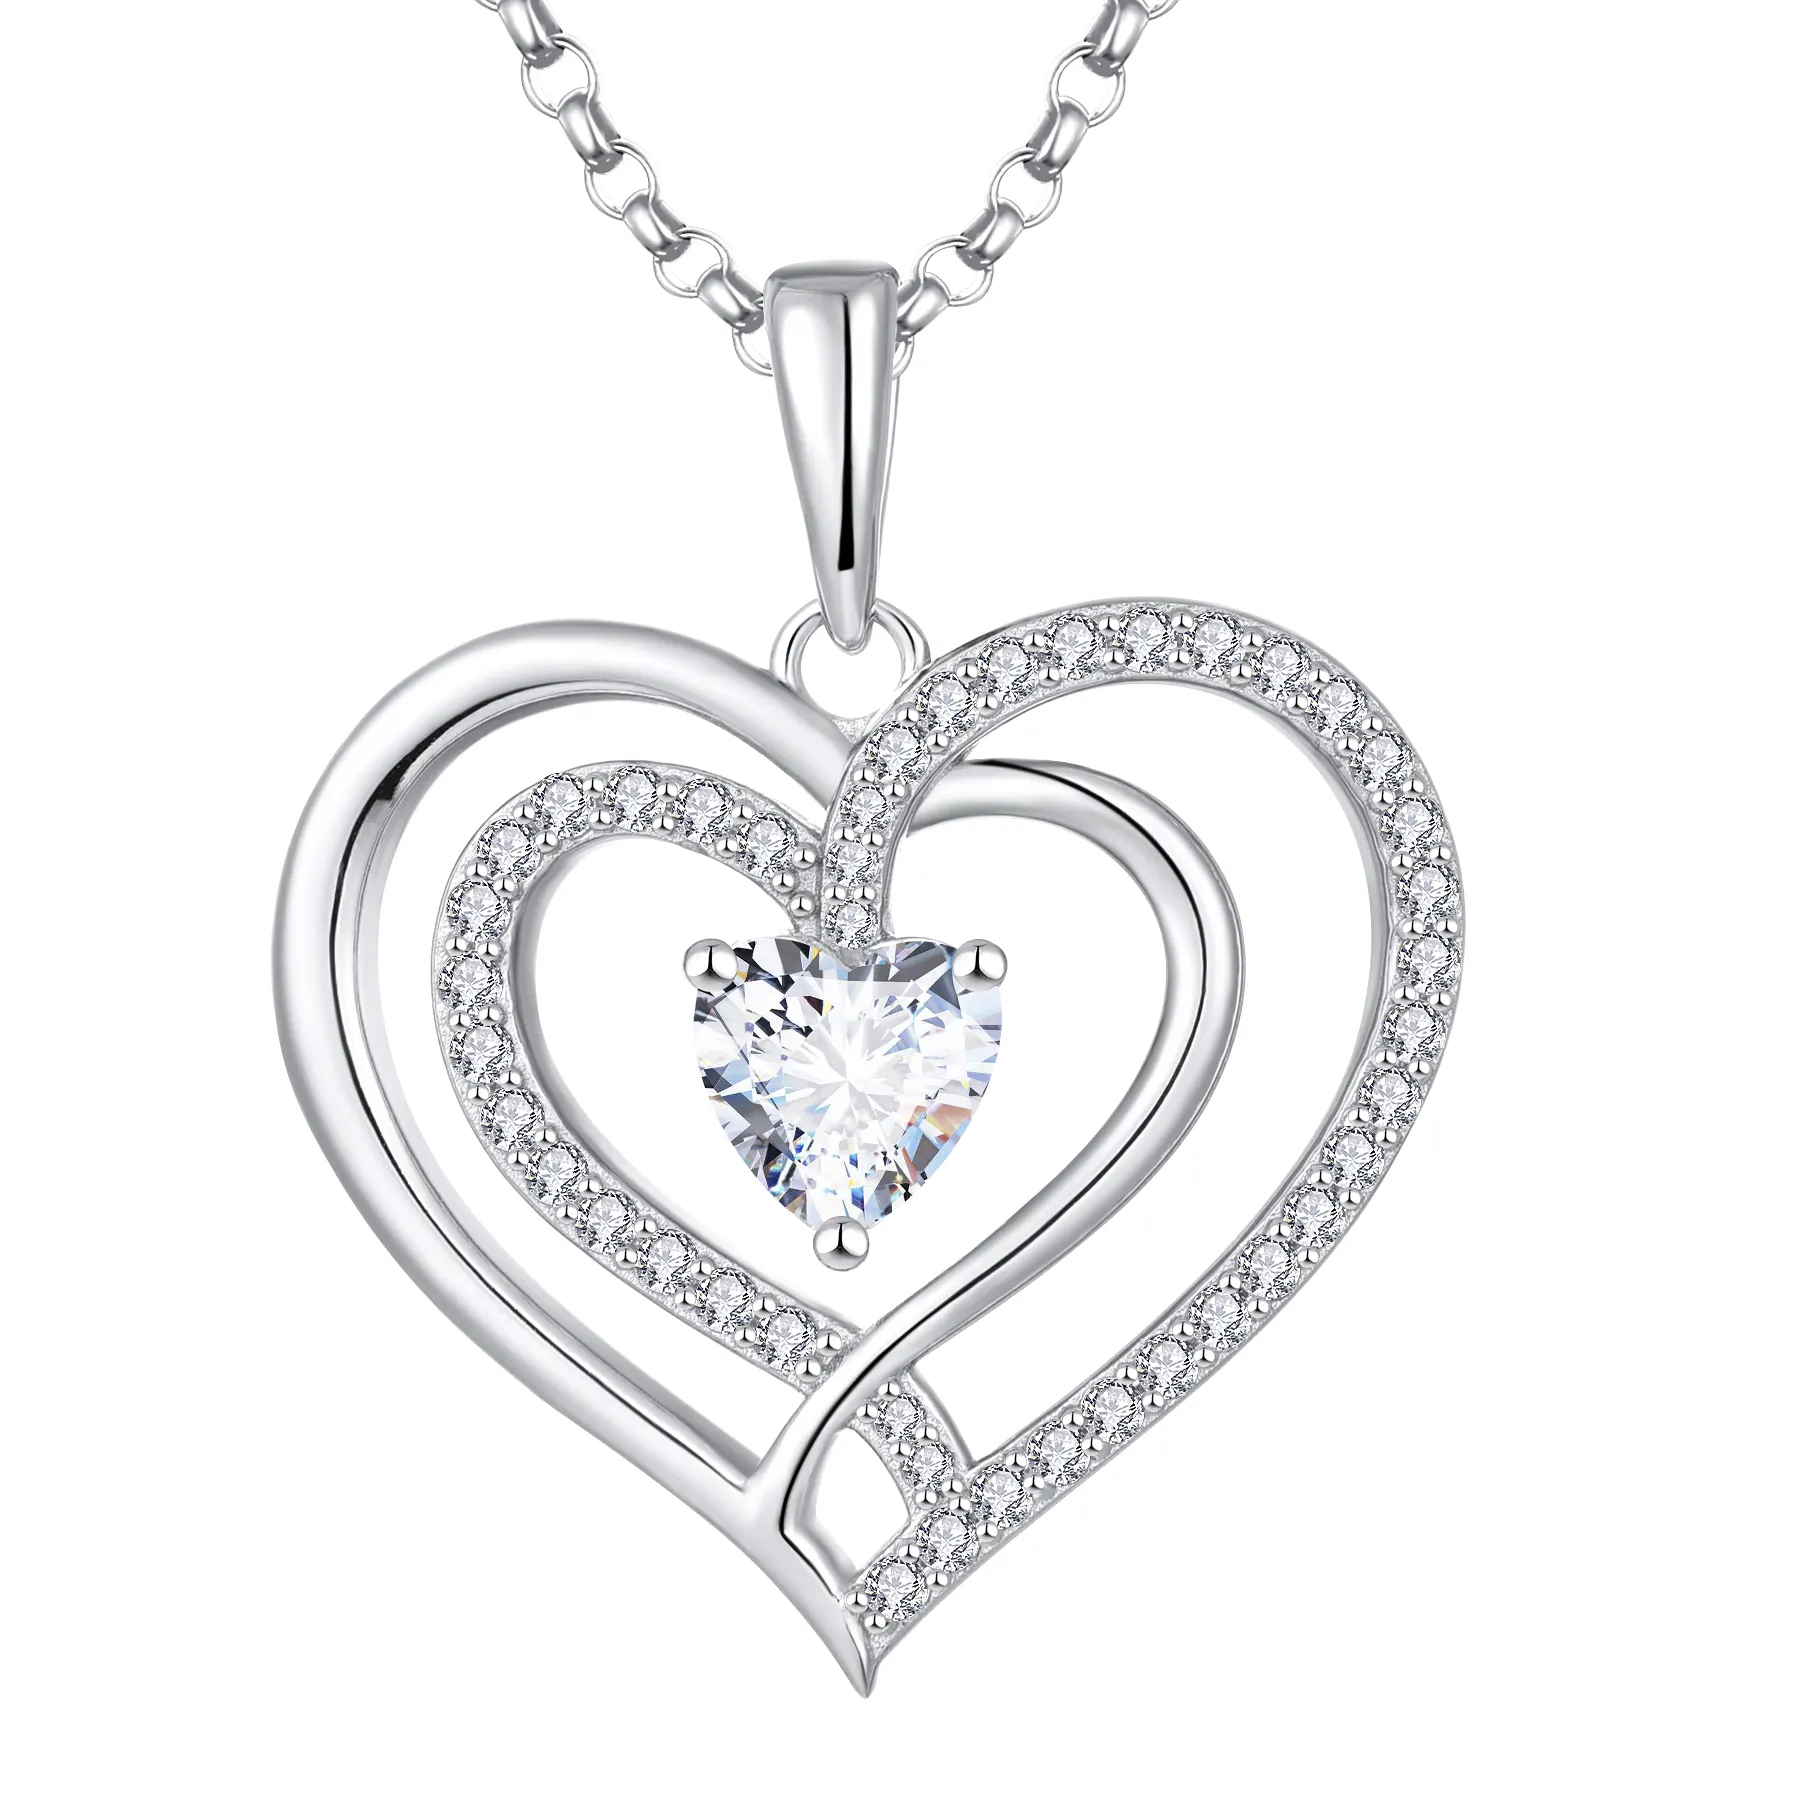 2023 New Jewelry Love Style Sterling Silver 925 Pendant Necklace In 3 Heart Design